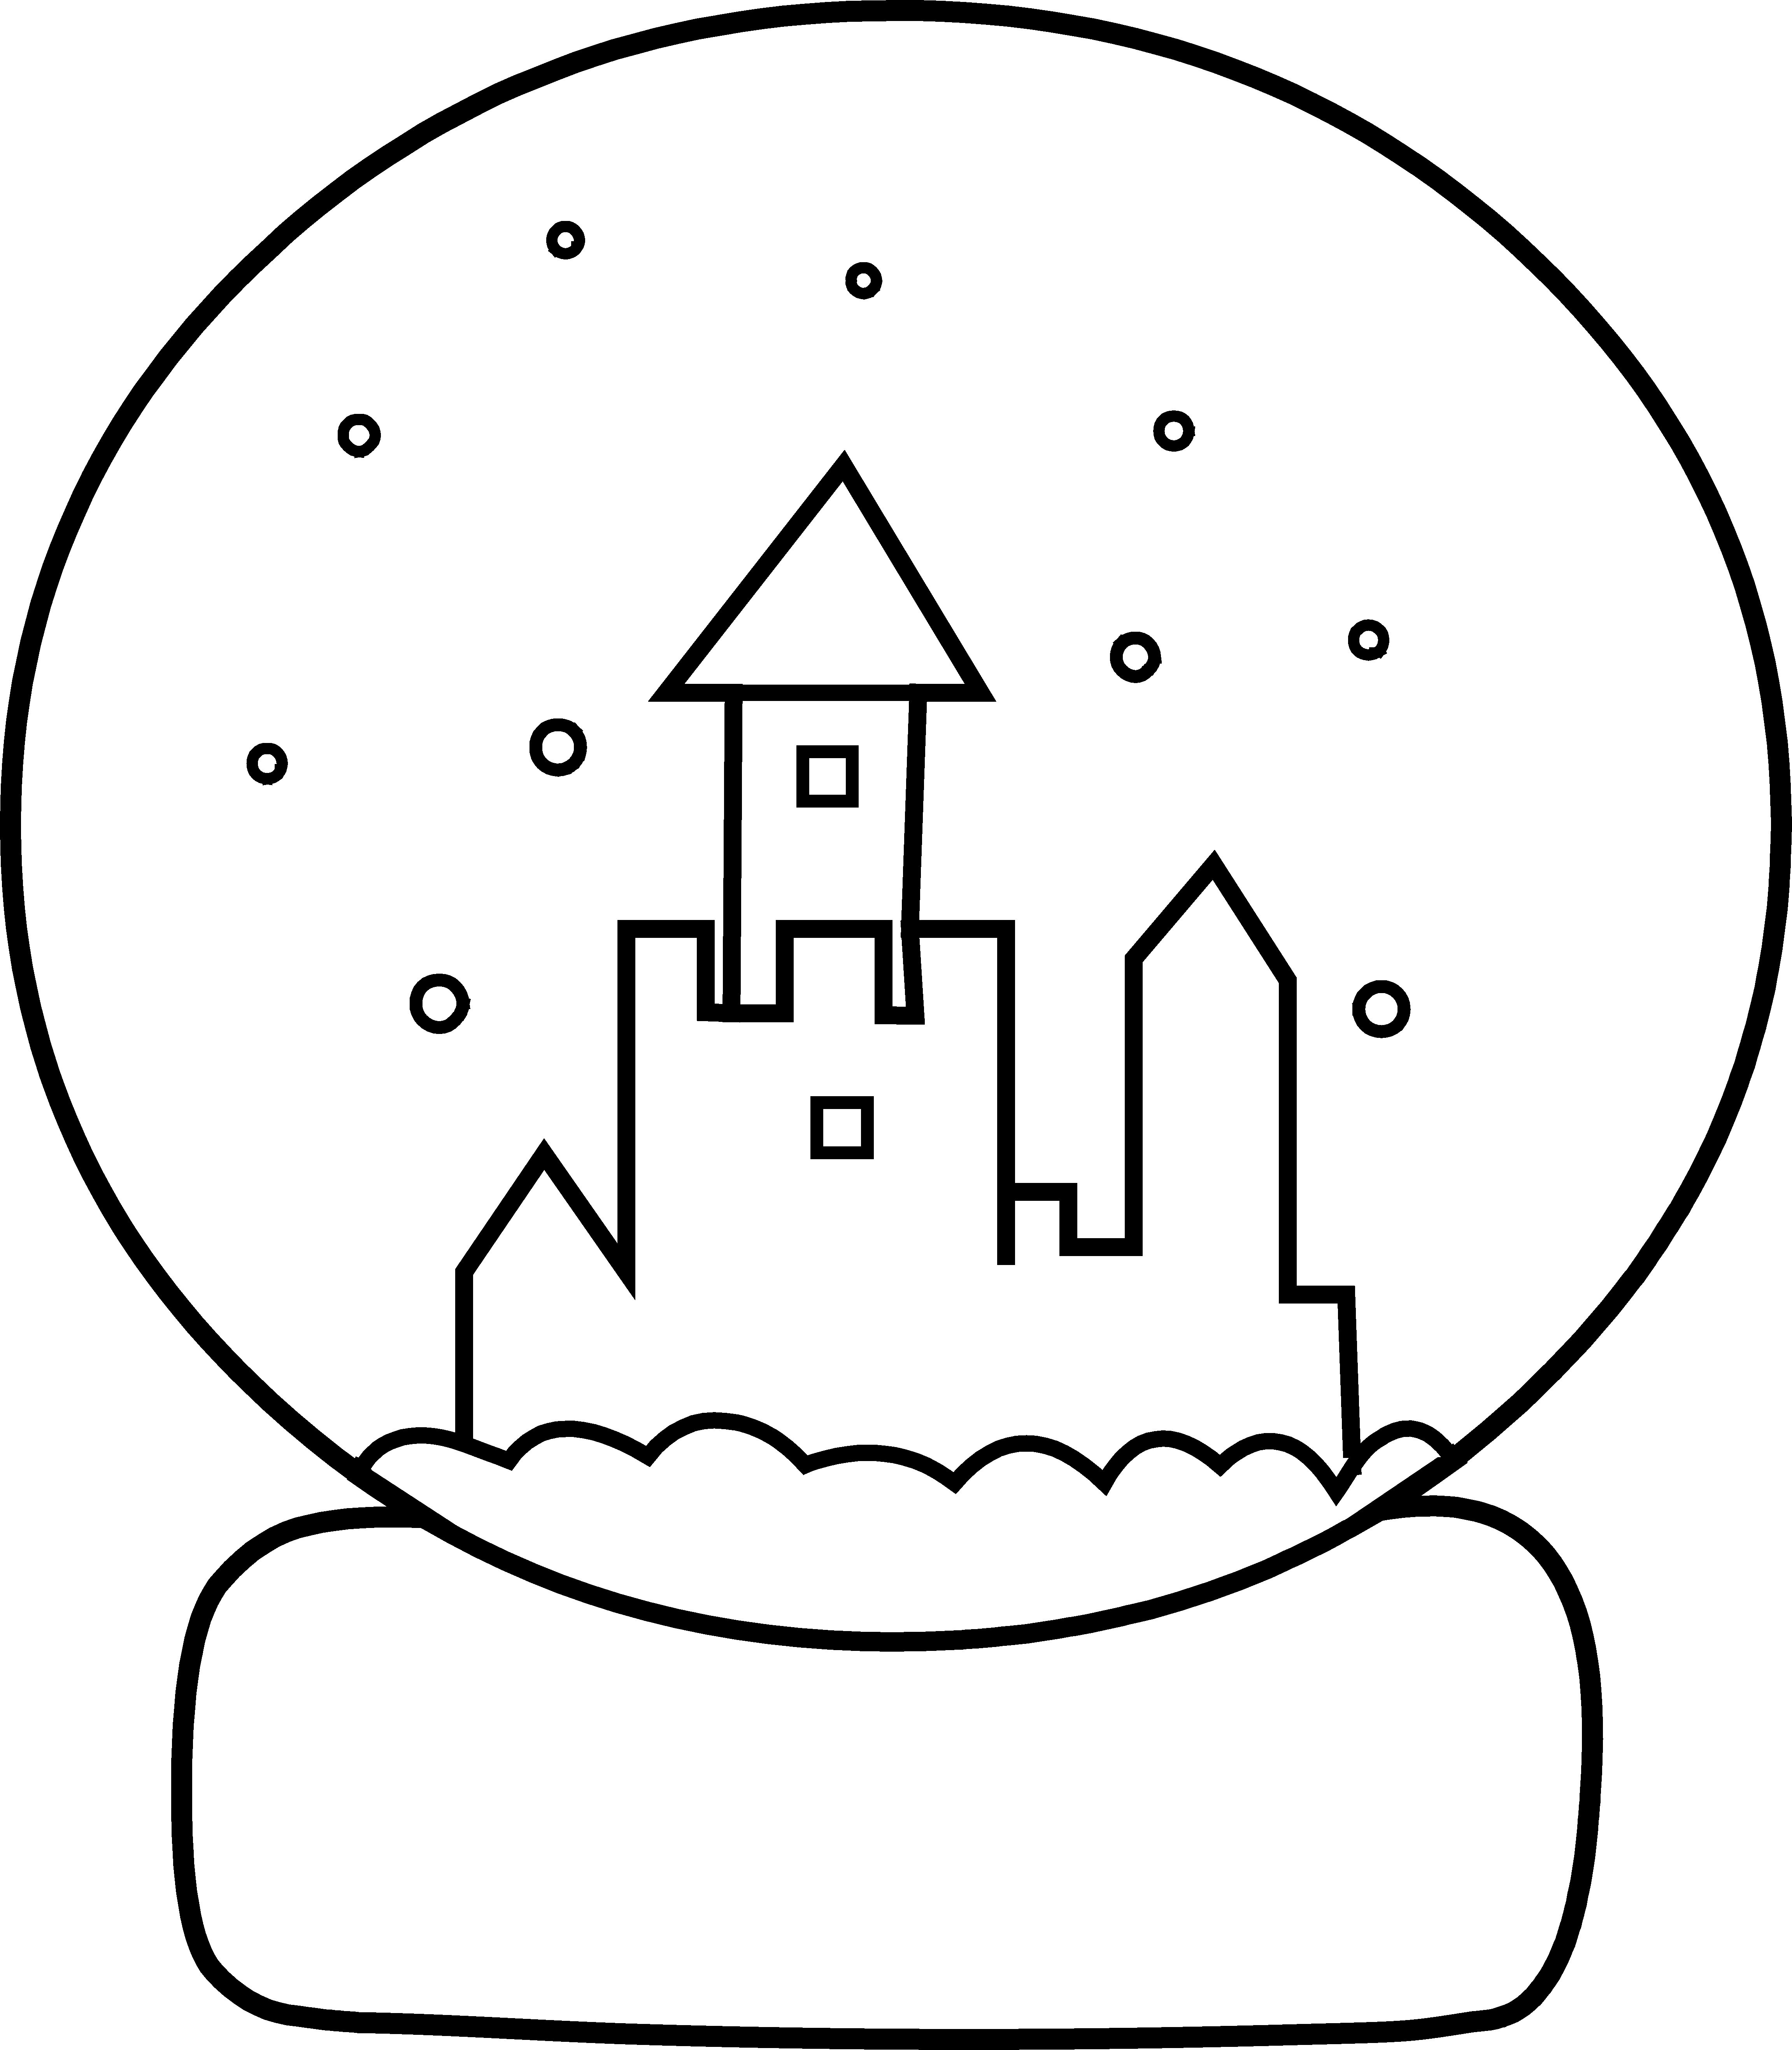 Cute Snow Globe Coloring Page - Free Clip Art